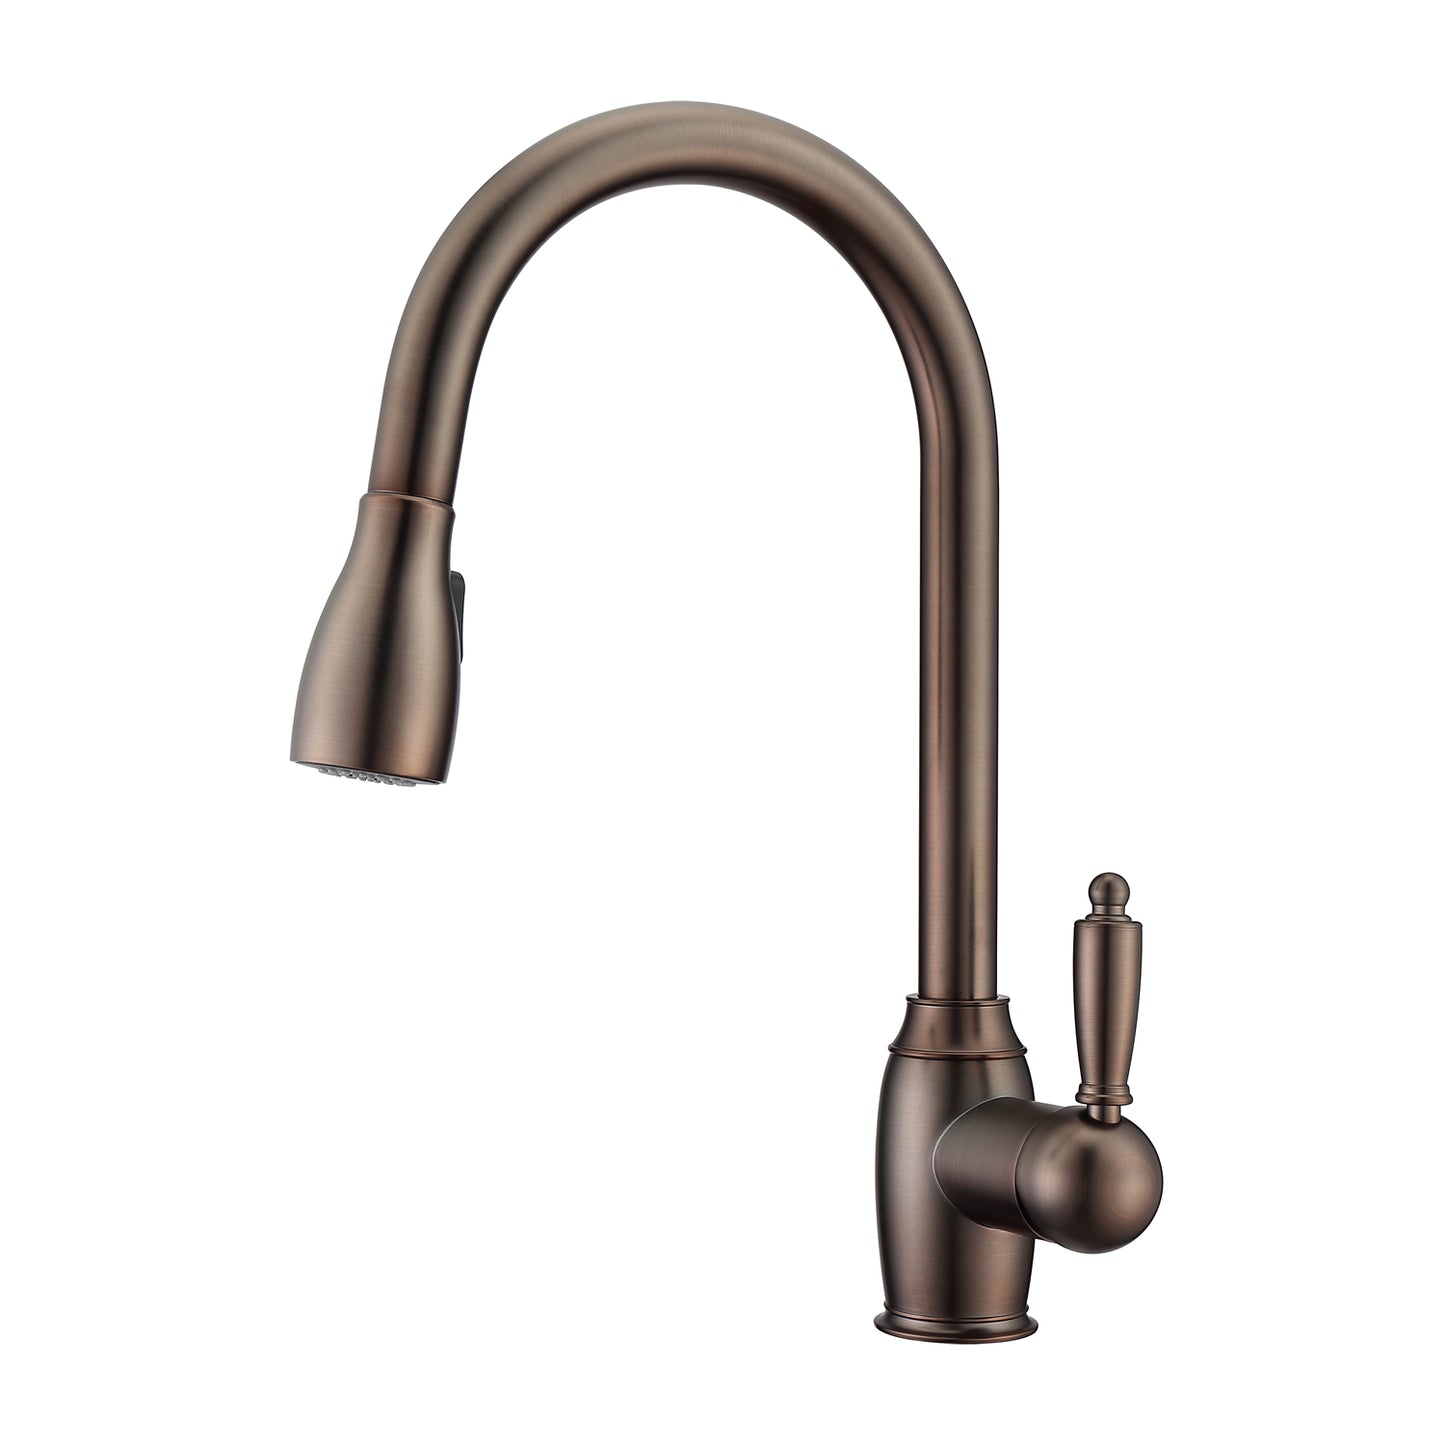 Bristo 2 Kitchen Faucet, Pull-Out Sprayer, Single Lever Handle, Oil Rubbed Bronze